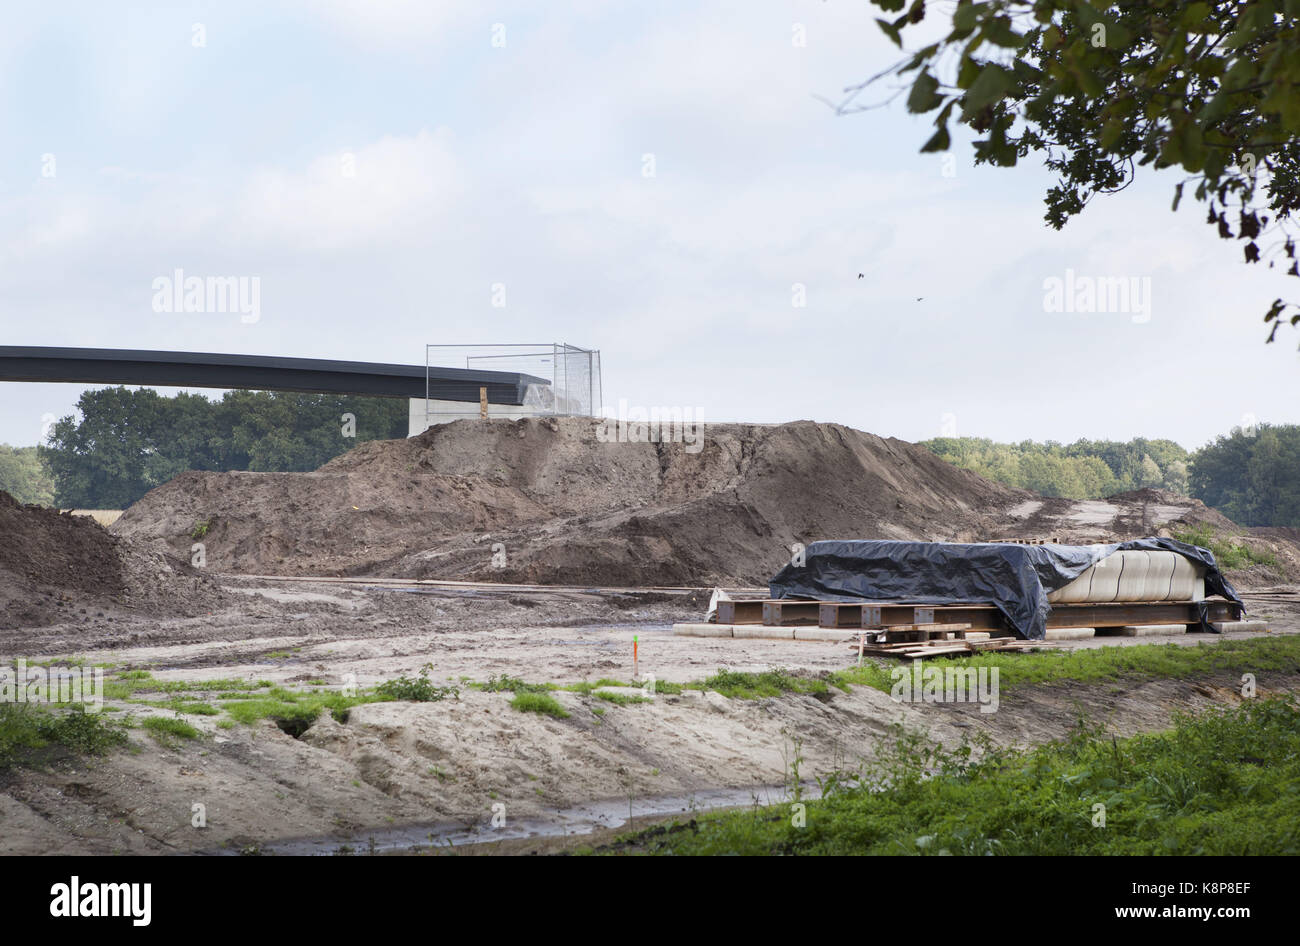 September 19, 2017 - Gemert, Noord-Brabant, Netherlands - The Netherlands, Gemert. Today, the first 3D-printed bike bridge in the world was placed. The town  Gemert-Bakel had a world scoop here. The first printed bicycle bridge in the world consists of 800 layers of concrete mortar, is 8 meters long and is placed over the â€˜Peelse Loopâ€™, a little river in this town. The bridge was printed layer by layer on a concrete printer by employees of the Technical University in Eindhoven under the guidance of Professor Theo Salet in the university laboratory. There are many advantages to this way of  Stock Photo